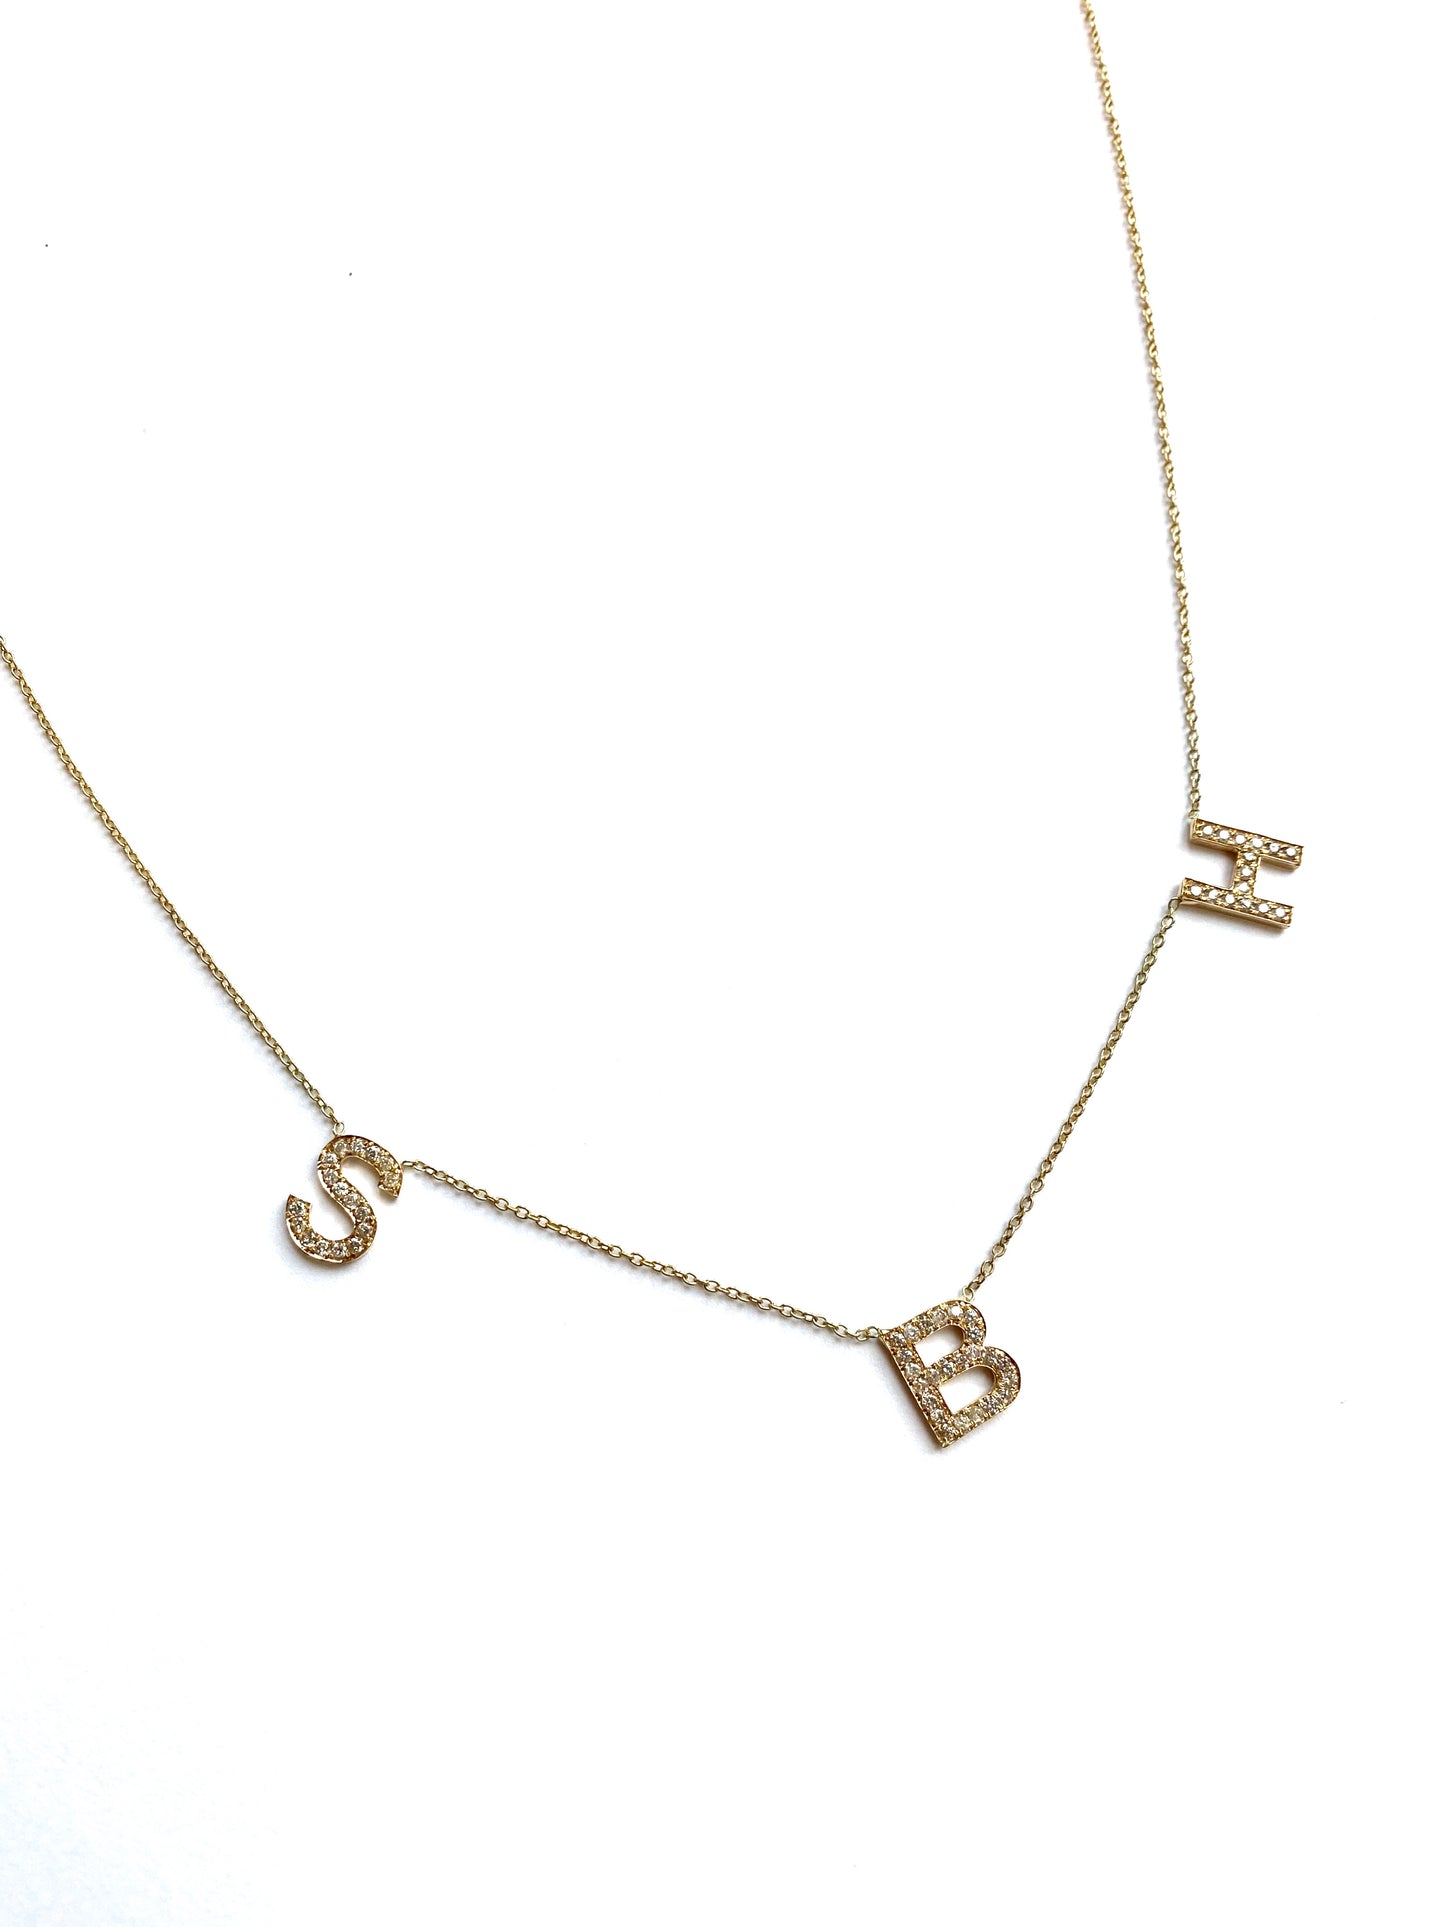 Custom Initial Necklace in 14k Gold